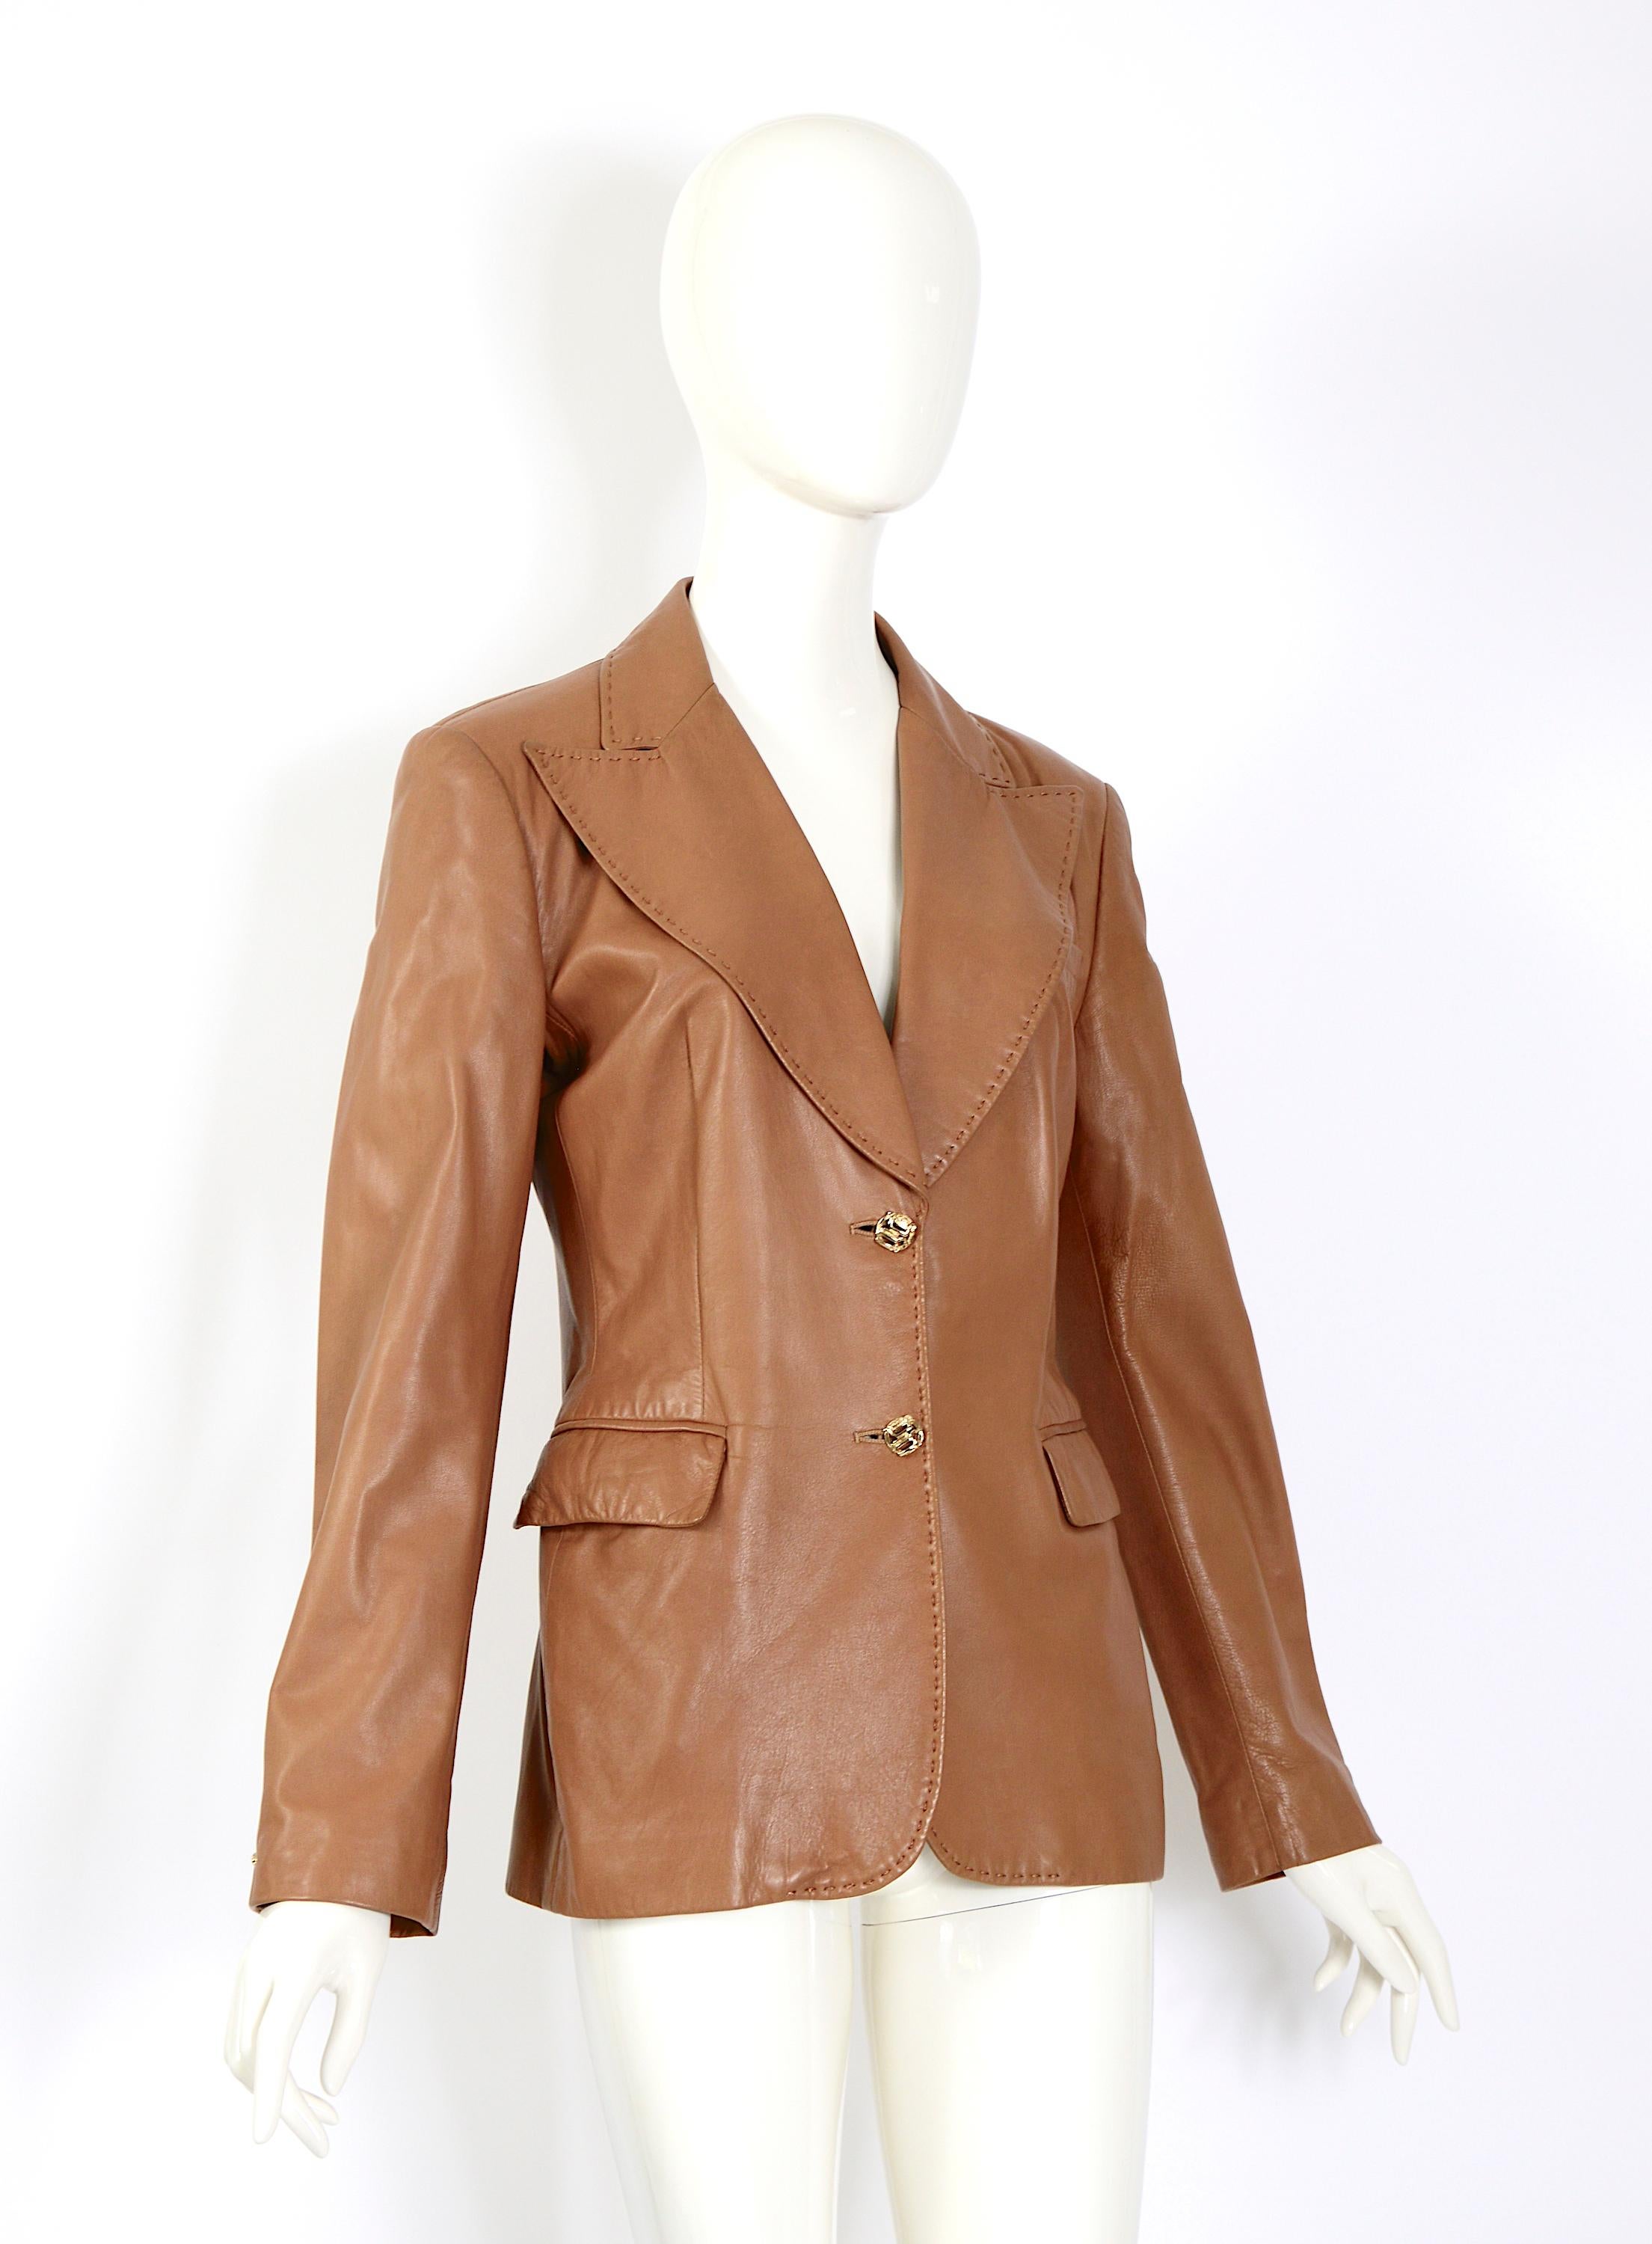 Vintage 1990s Gianni Versace timeless soft leather tailored jacket For Sale 3